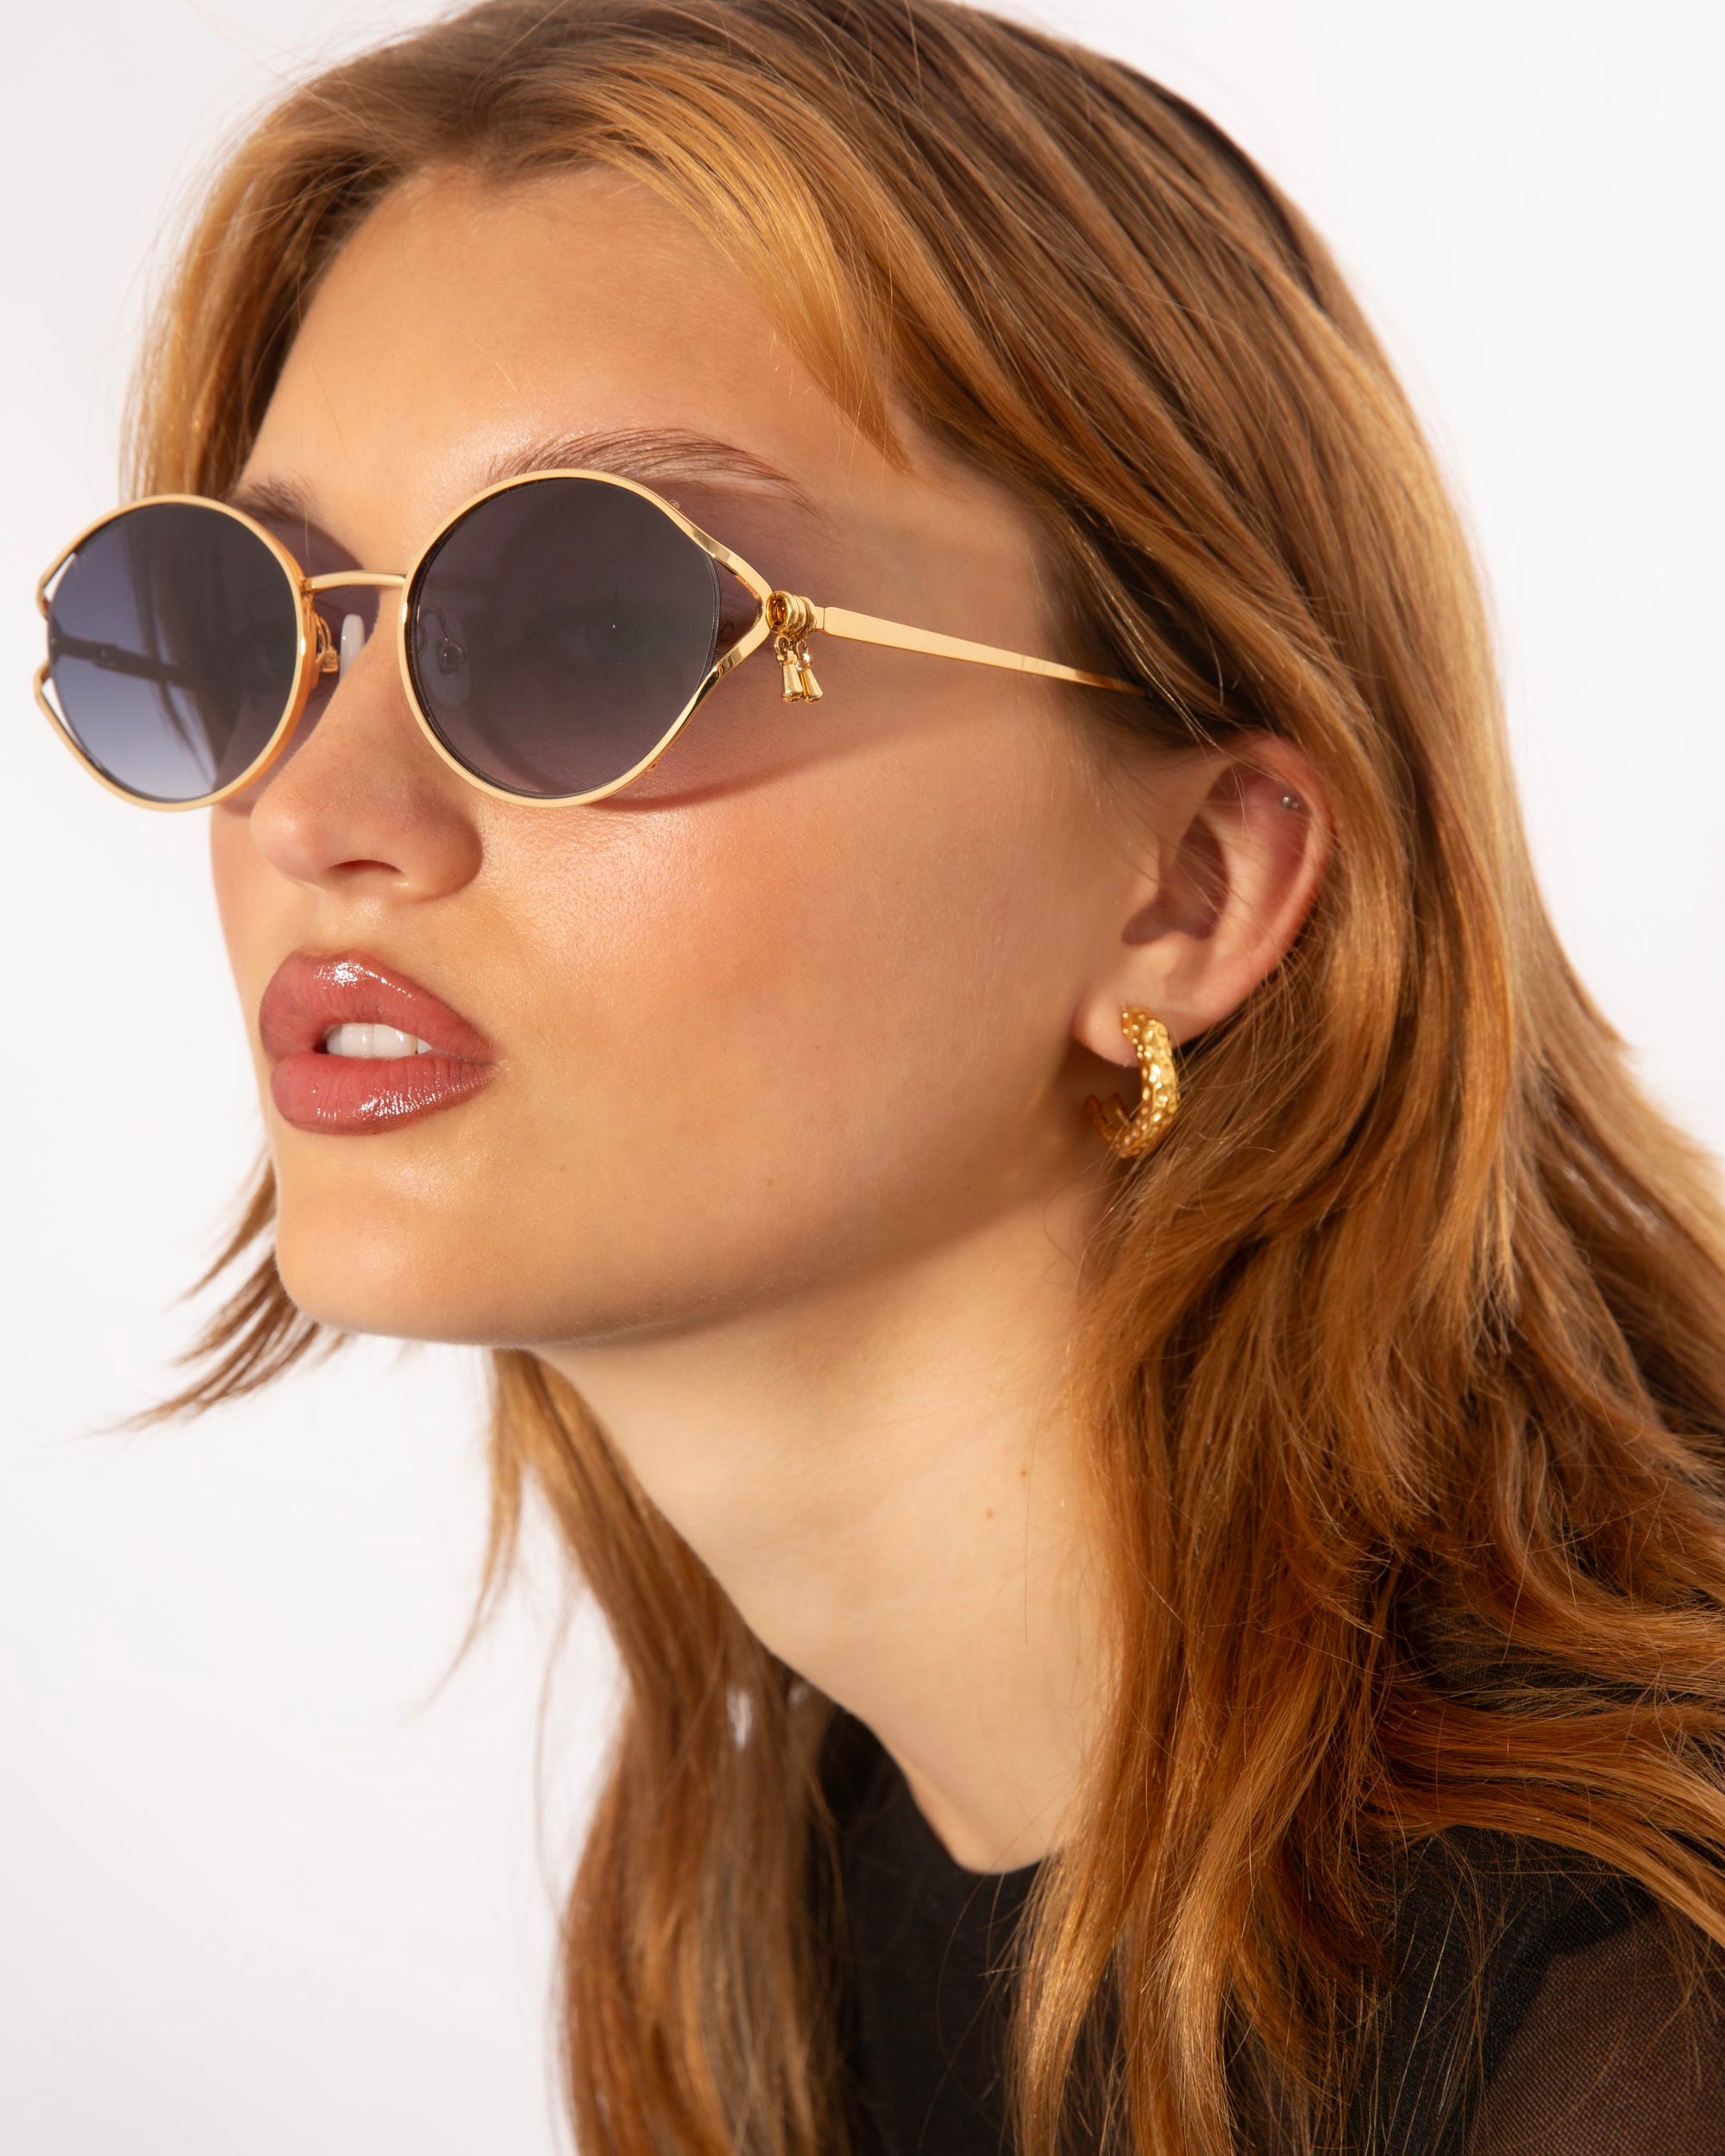 A person with long, wavy, light brown hair is wearing round, gold-rimmed sunglasses from For Art&#39;s Sake® featuring jade-stone nose pads and gold hoop earrings. They are looking slightly to the side with a neutral expression. The background is plain white. The sunglasses are called Sky.